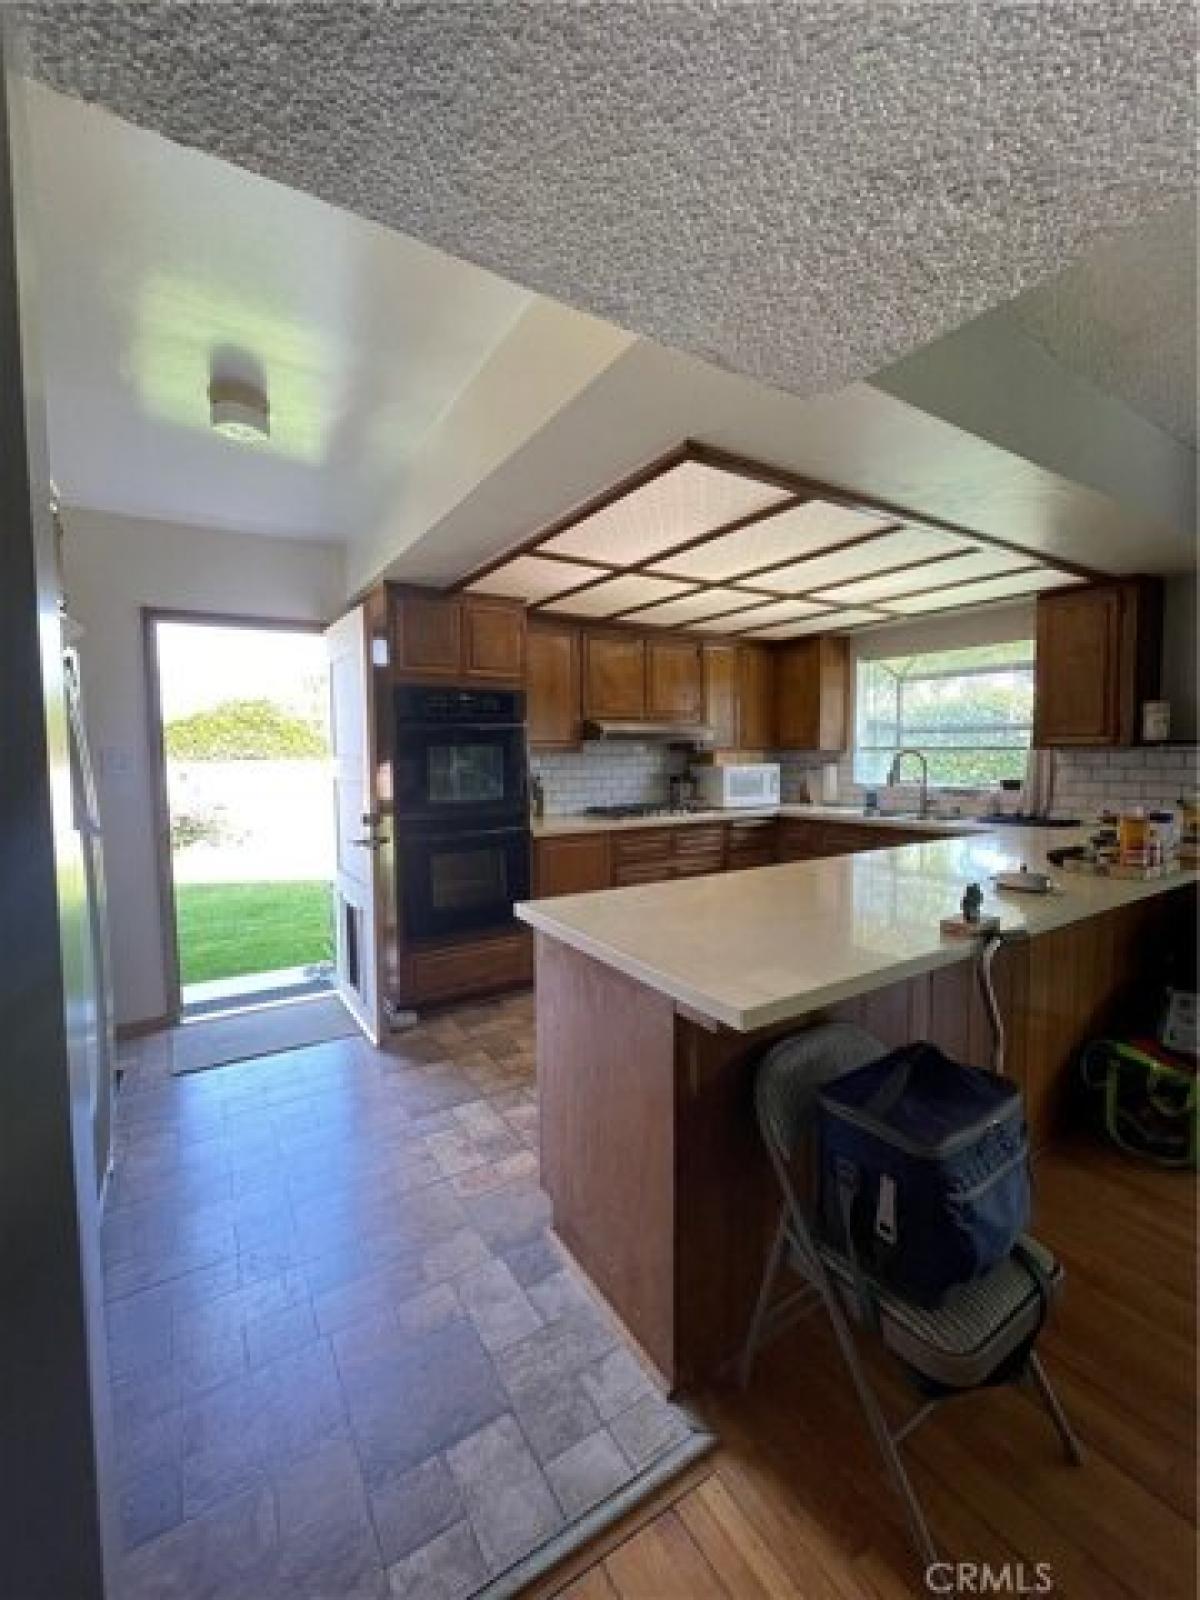 Picture of Home For Rent in Rancho Palos Verdes, California, United States